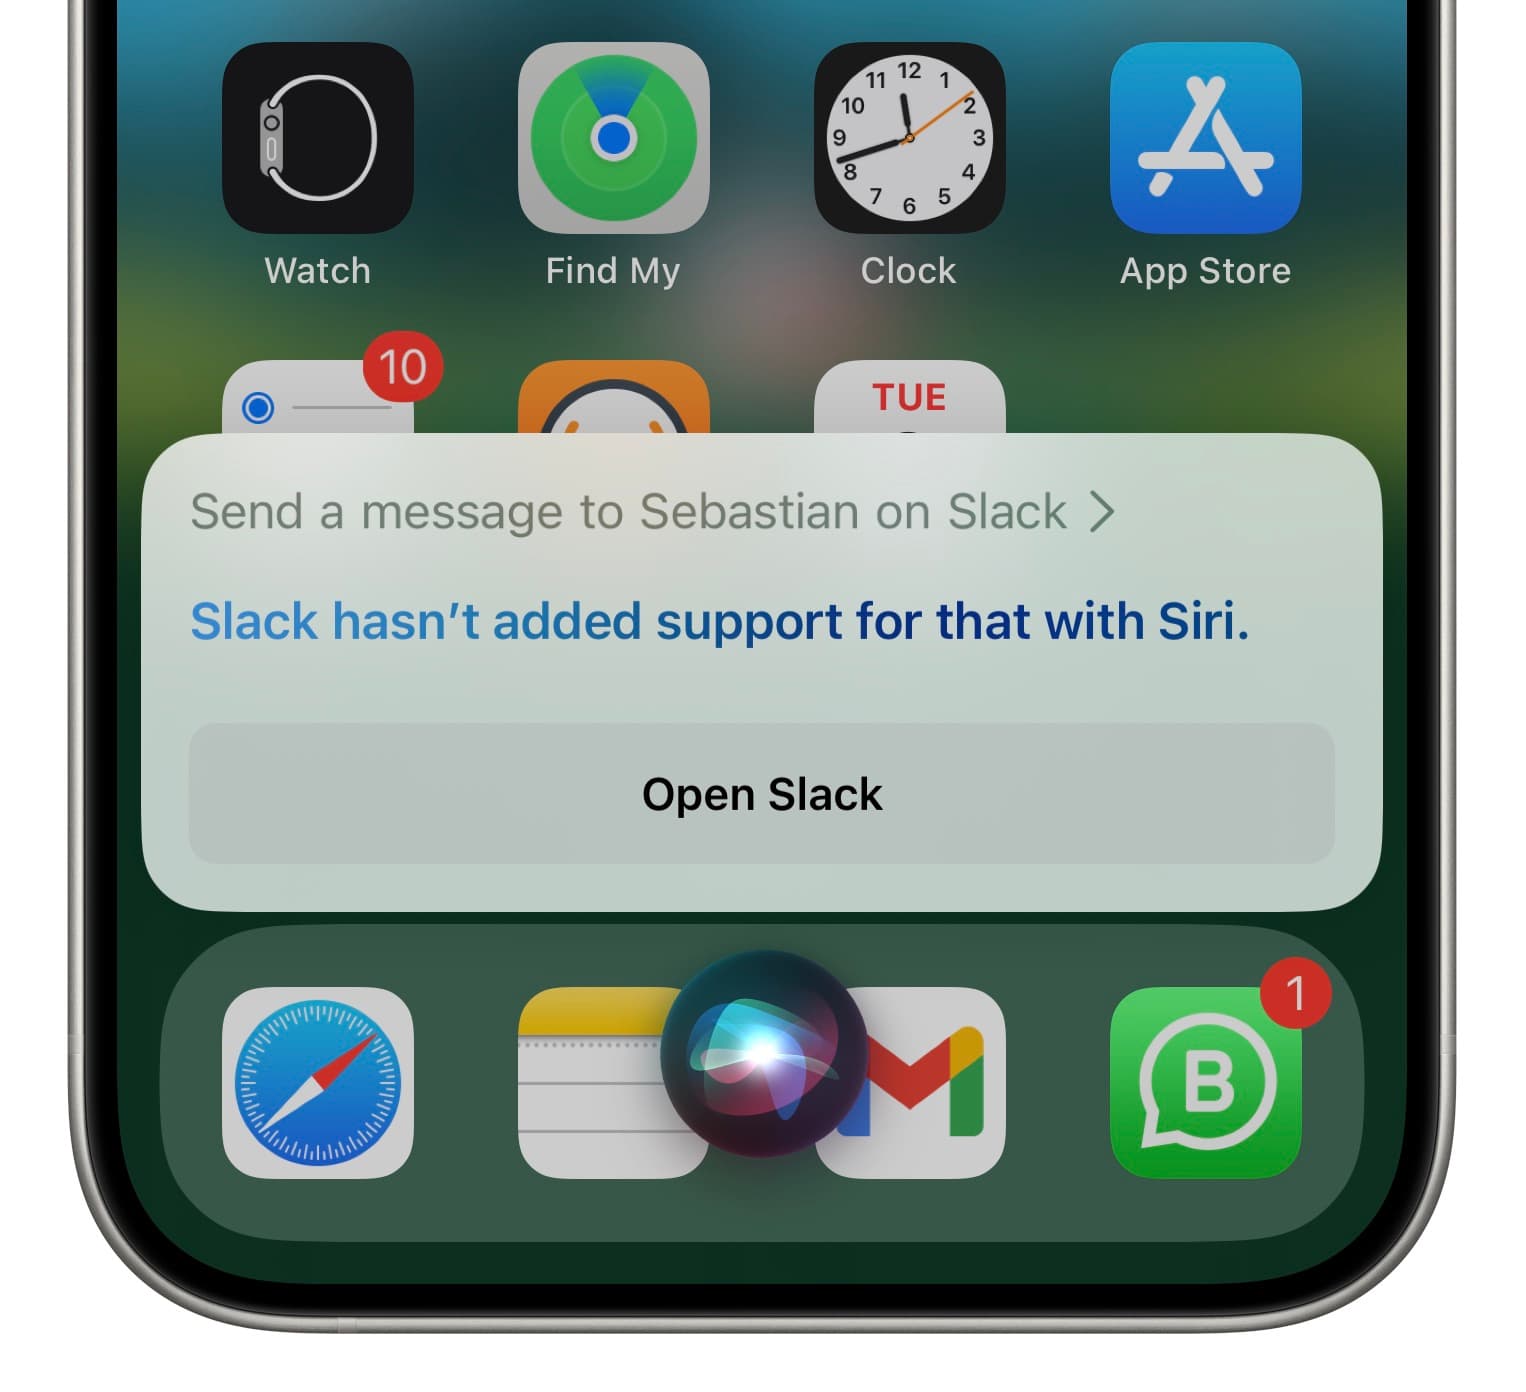 Slack hasn't added support for that with Siri alert on iPhone